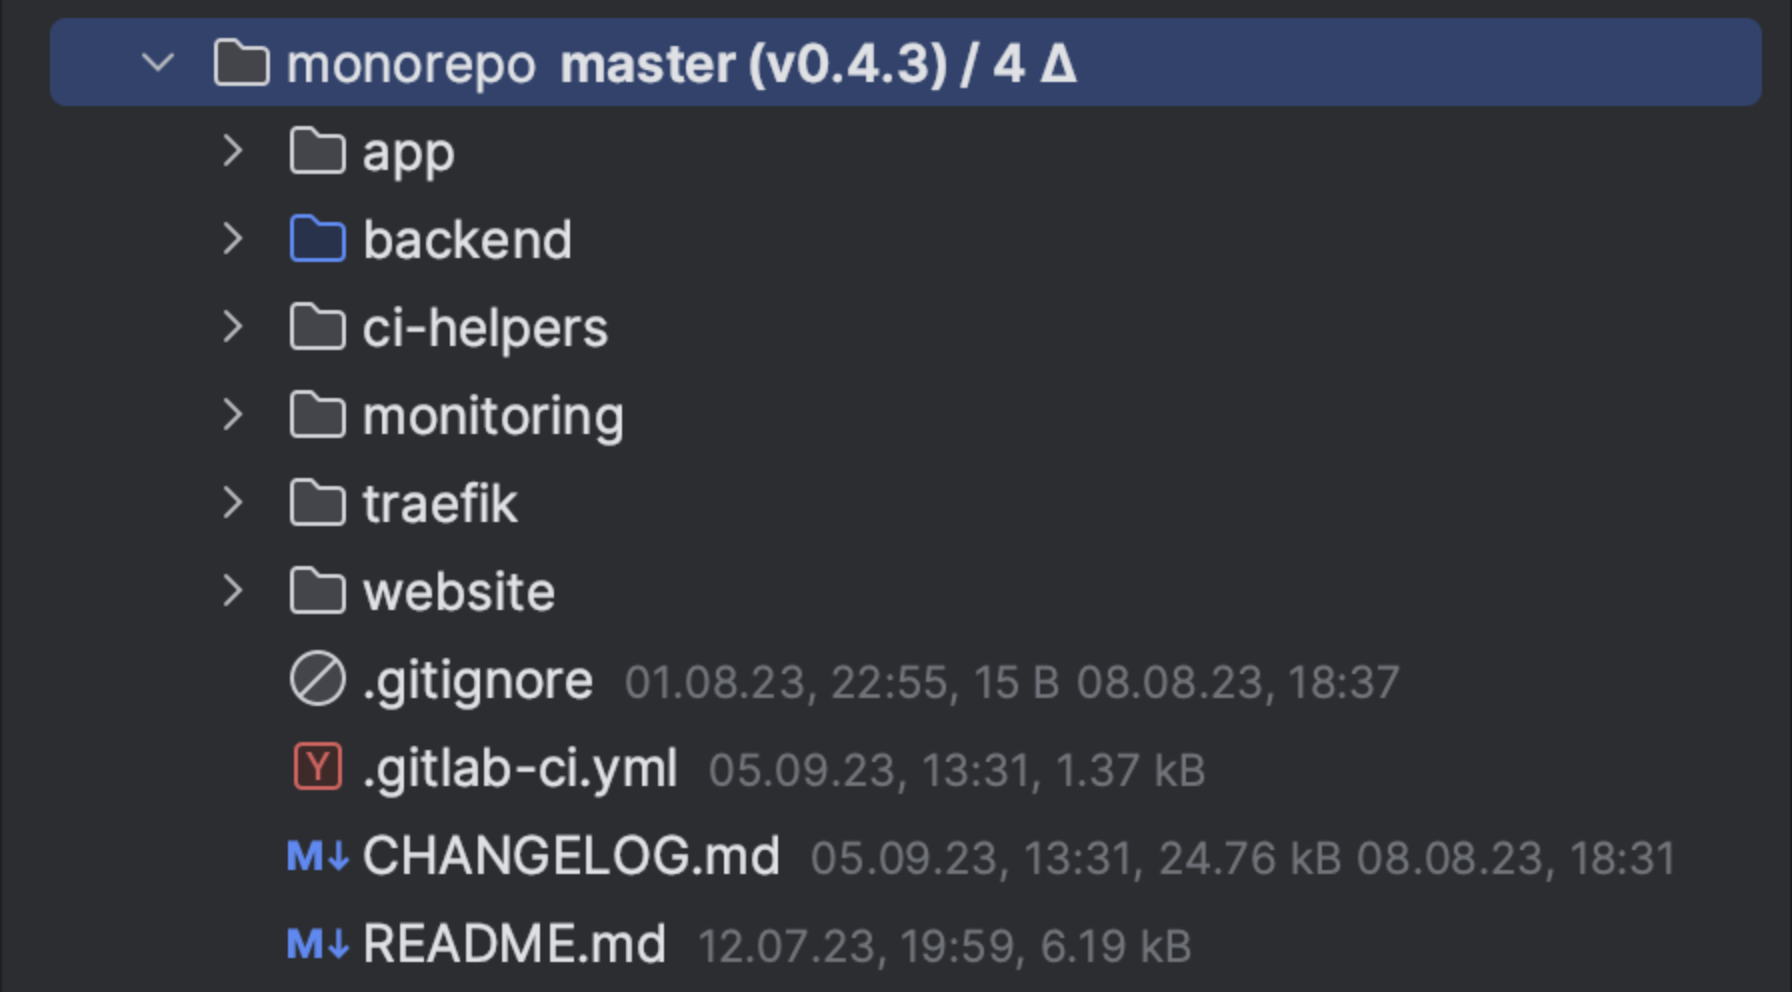 Example of what a monorepo setup looks like in git